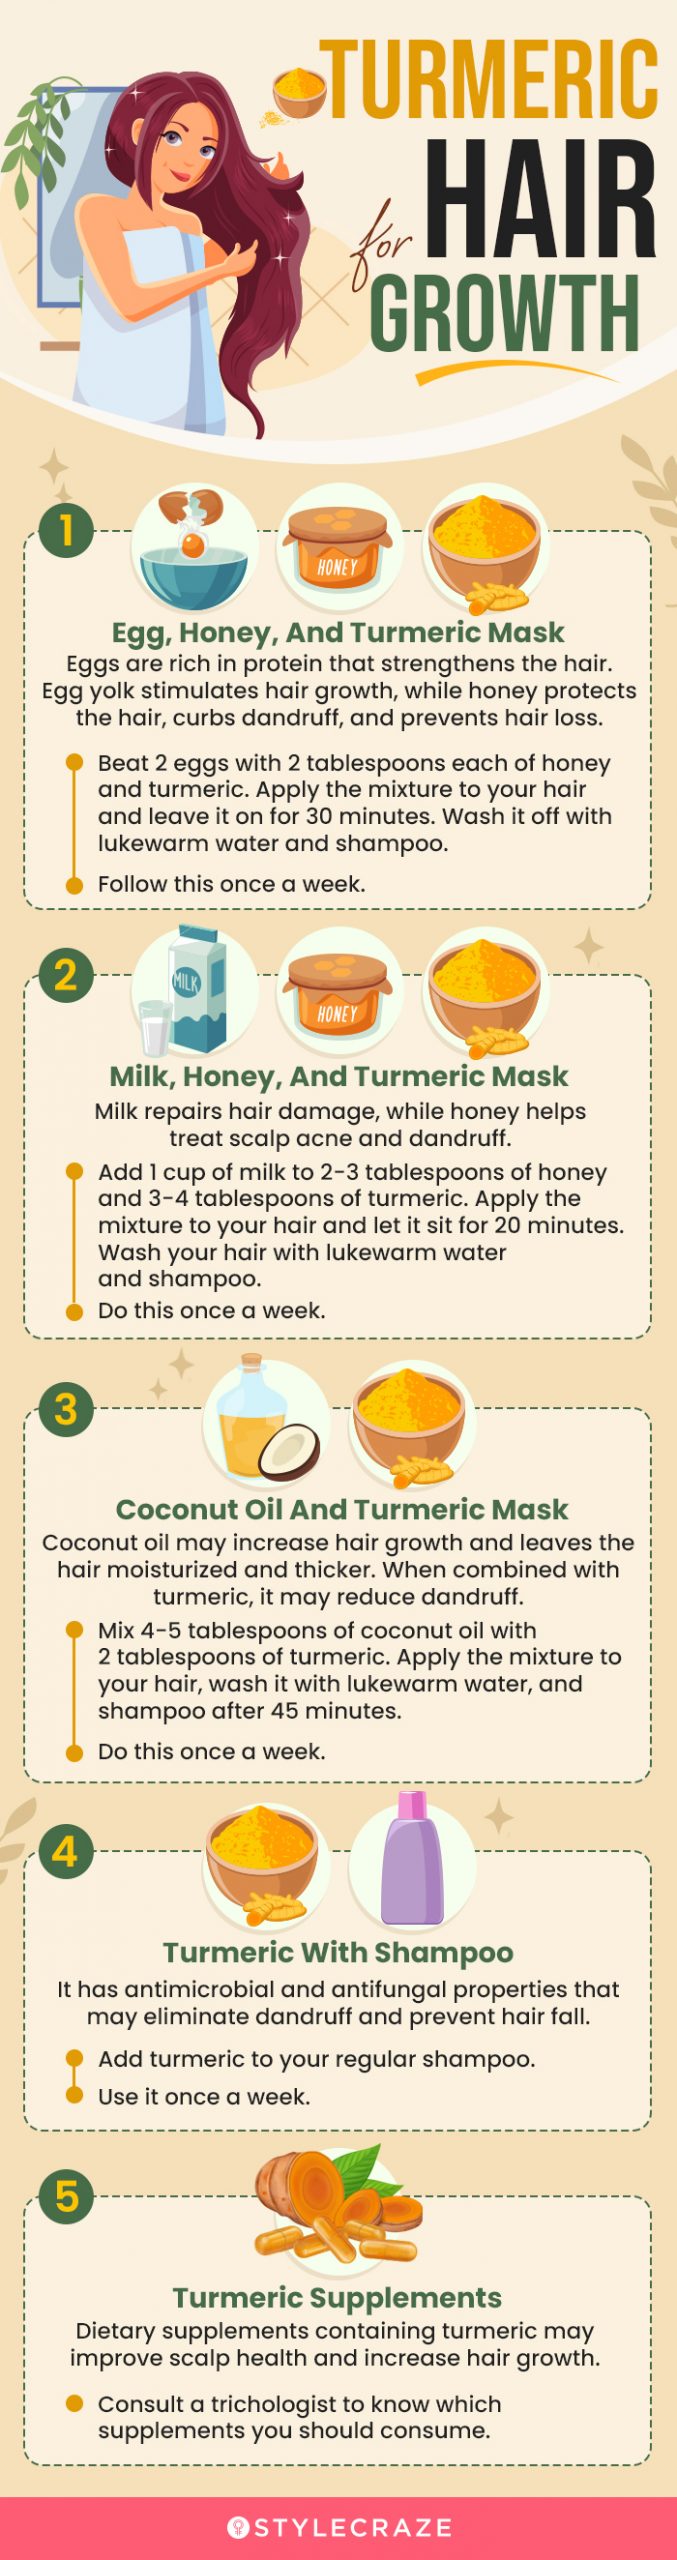 turmeric for hair growth (infographic)